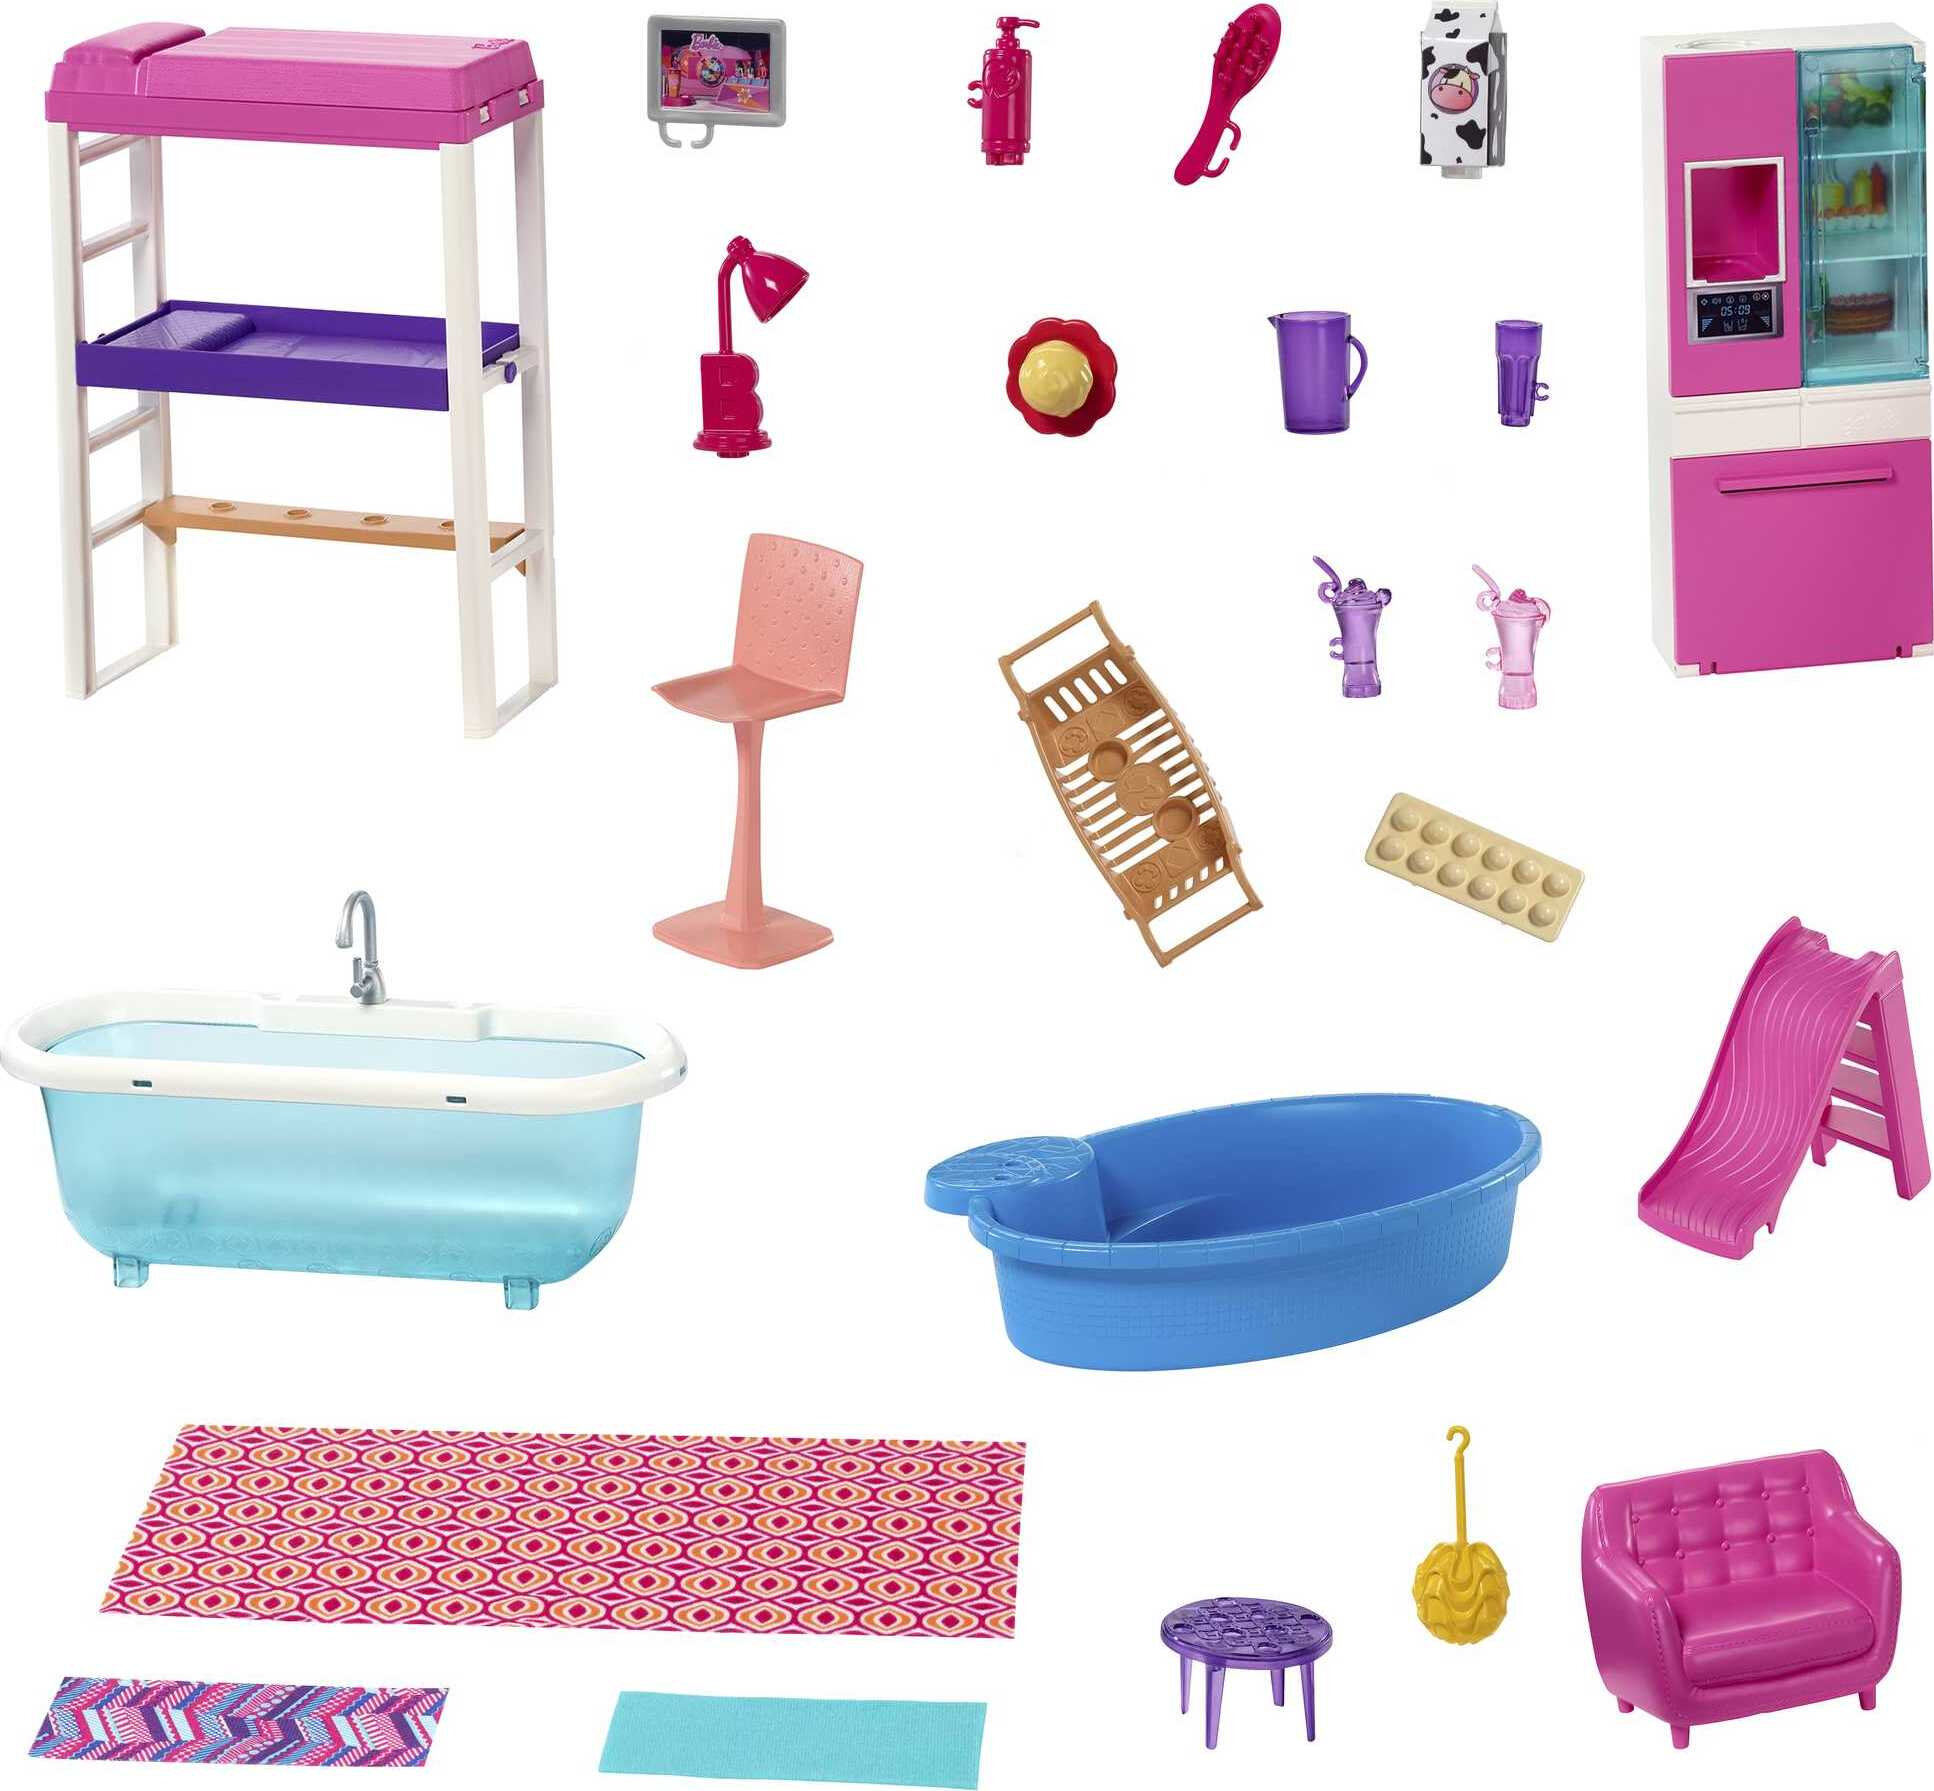 Barbie Dollhouse Set with 3 Dolls and Furniture, Pool and Accessories, Ages 4 & up - image 5 of 6